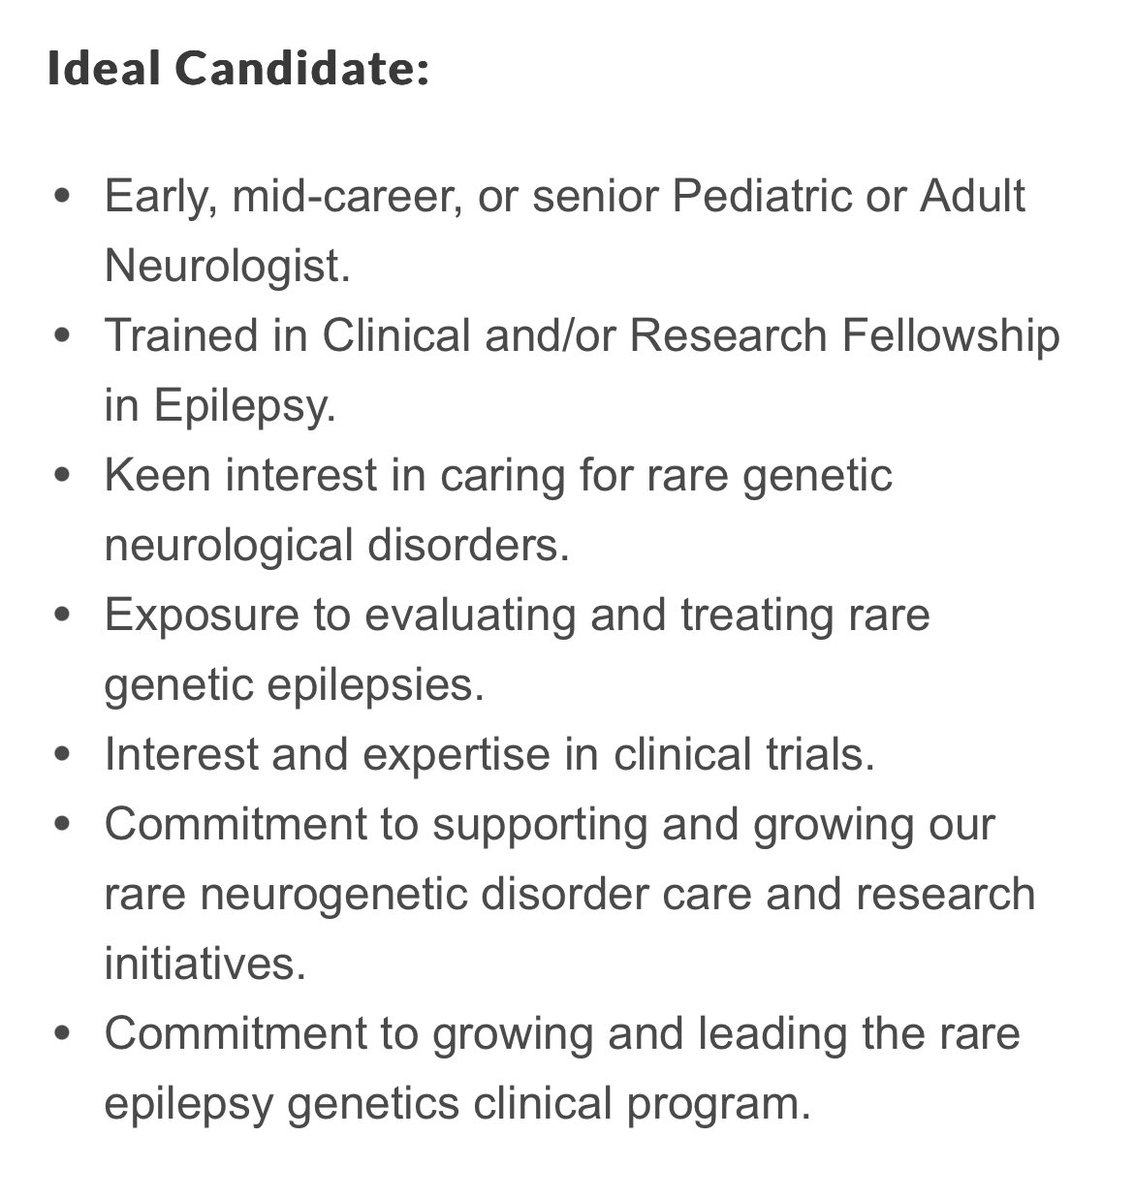 Please share‼️Our center for Neurogenetics, is jointly (adult Epilepsy & pediatric neurology) recruiting a neurologist with focus: ➡️ Exclusively genetic epilepsies 🧬 ➡️ Peds 👦👧🏿 + adult 👩 👨🏽 ➡️ Care 💊+ research 🧐 [academic + industry sponsored] careers.uth.tmc.edu/us/en/job/2400…